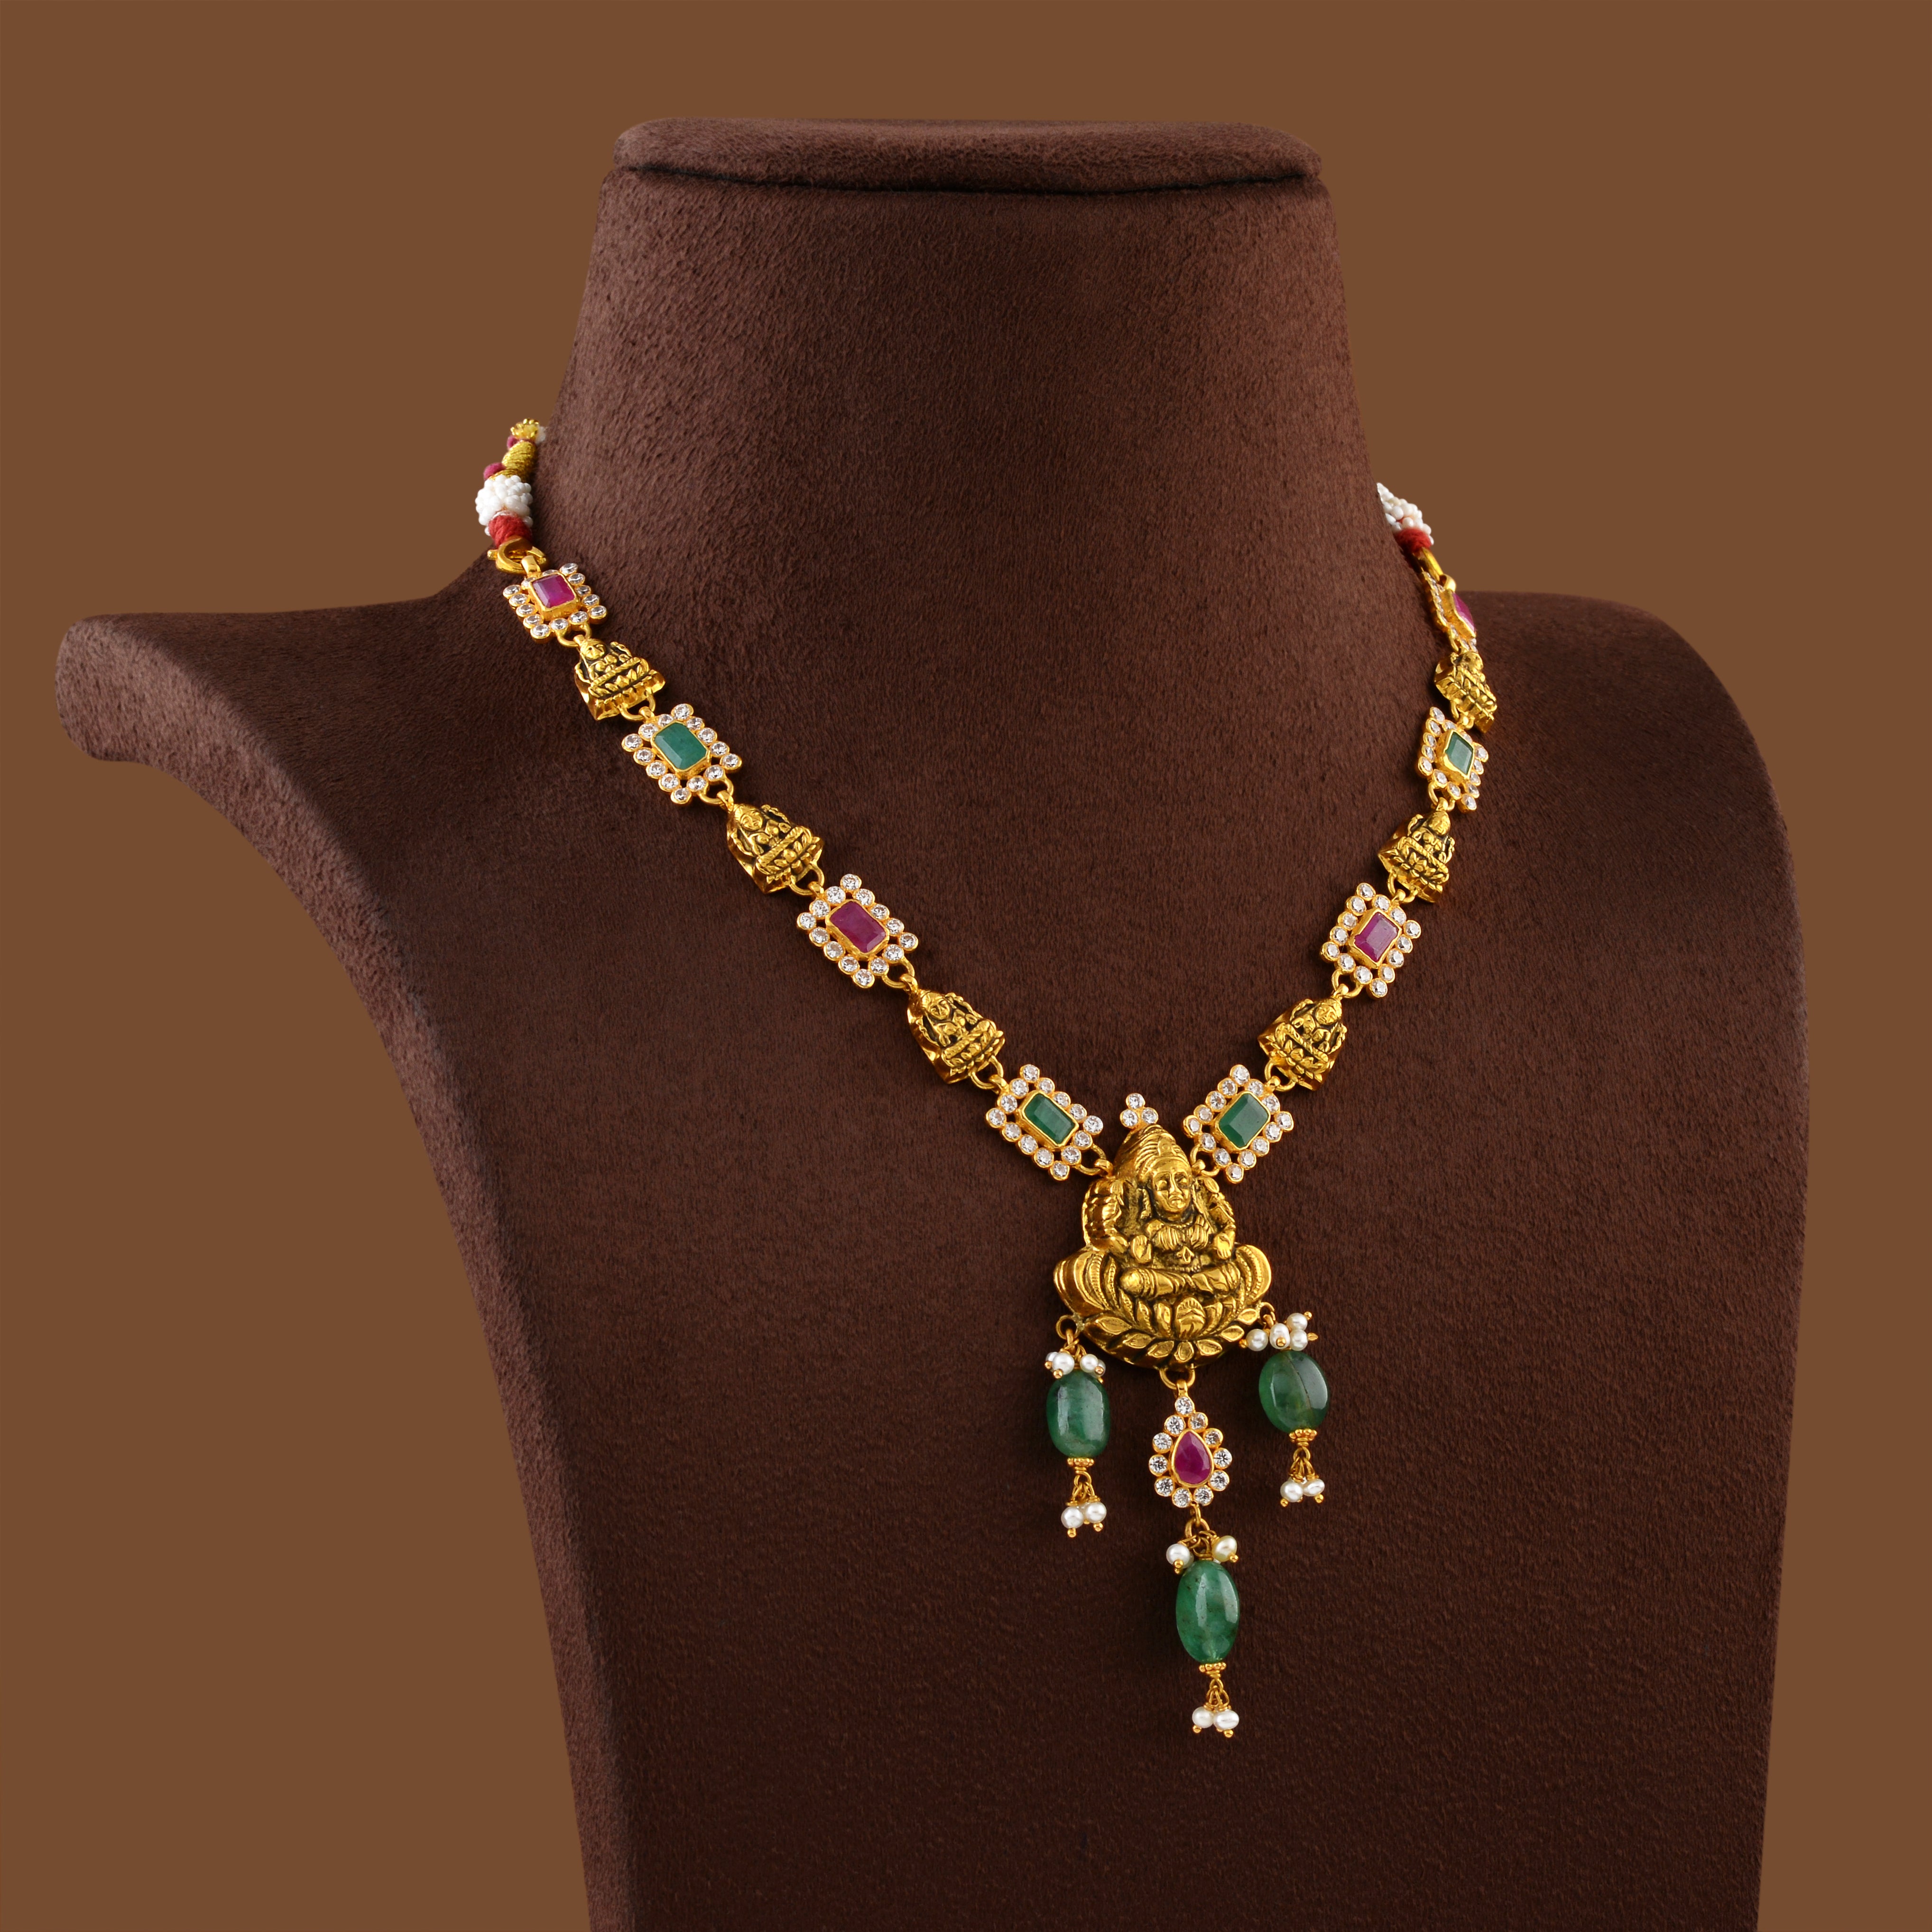 22K Gold Necklace With Laxmi Pendant